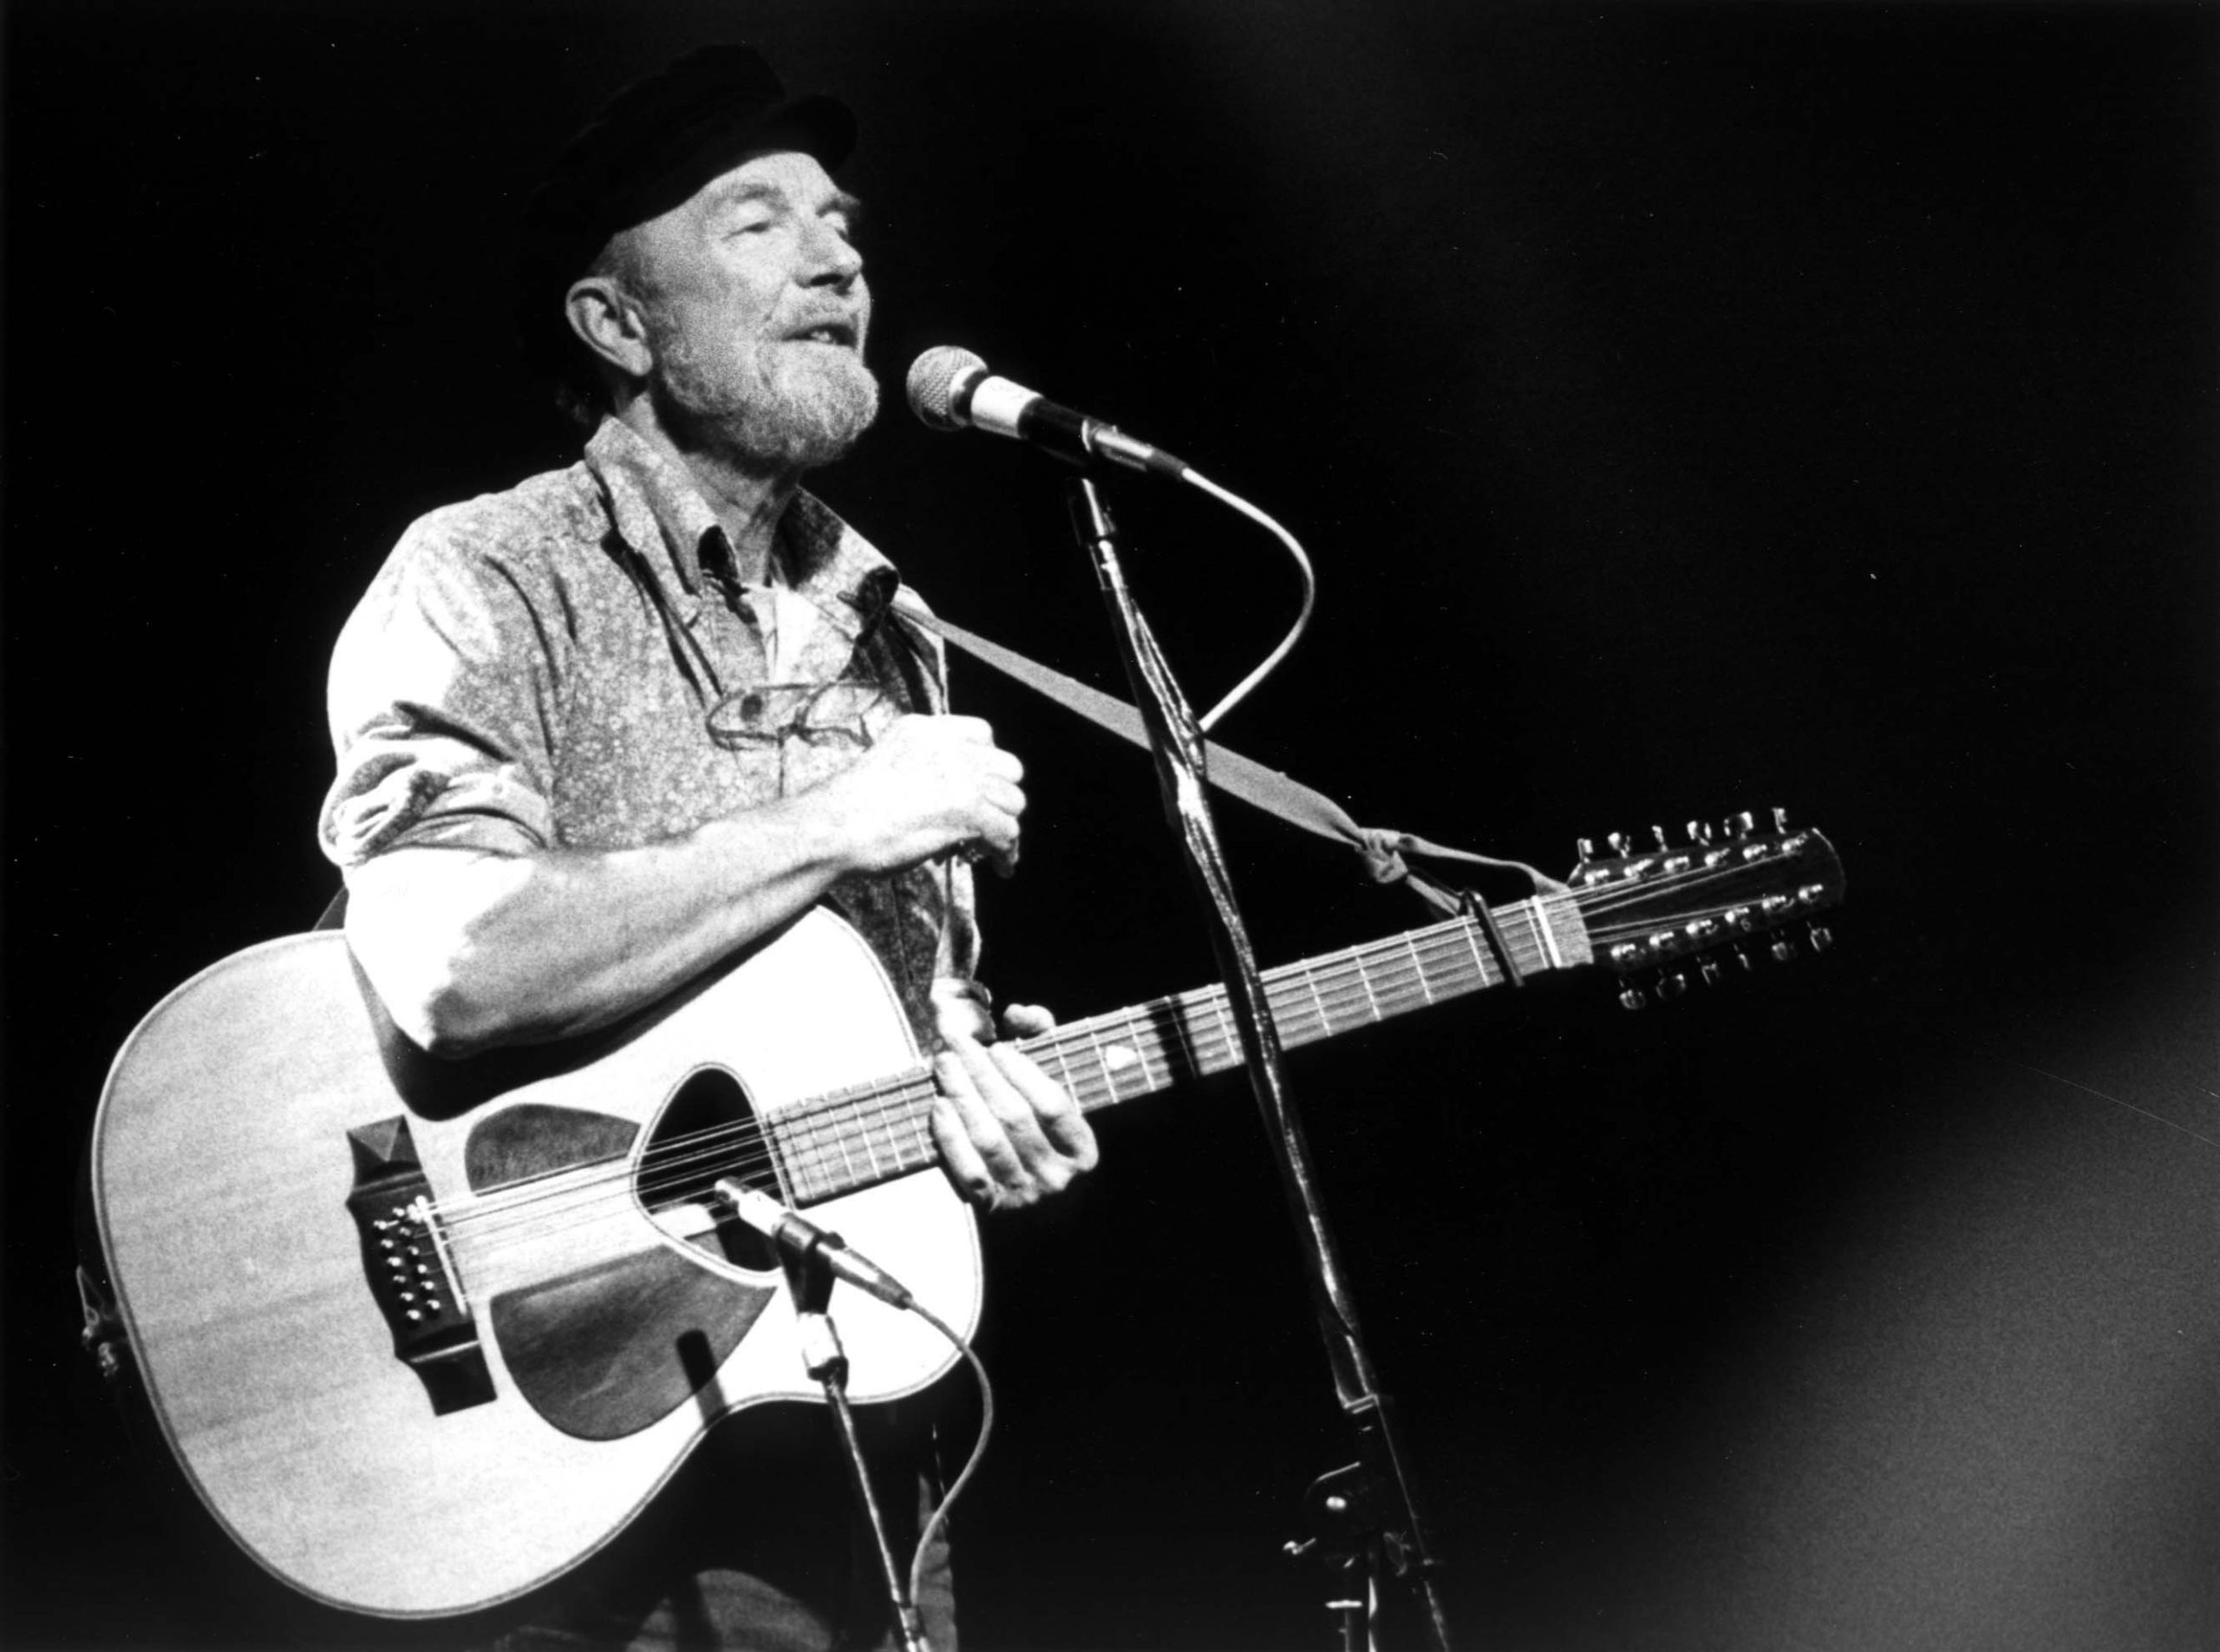 Folksinger and social activist Pete Seeger in a 1986 photo